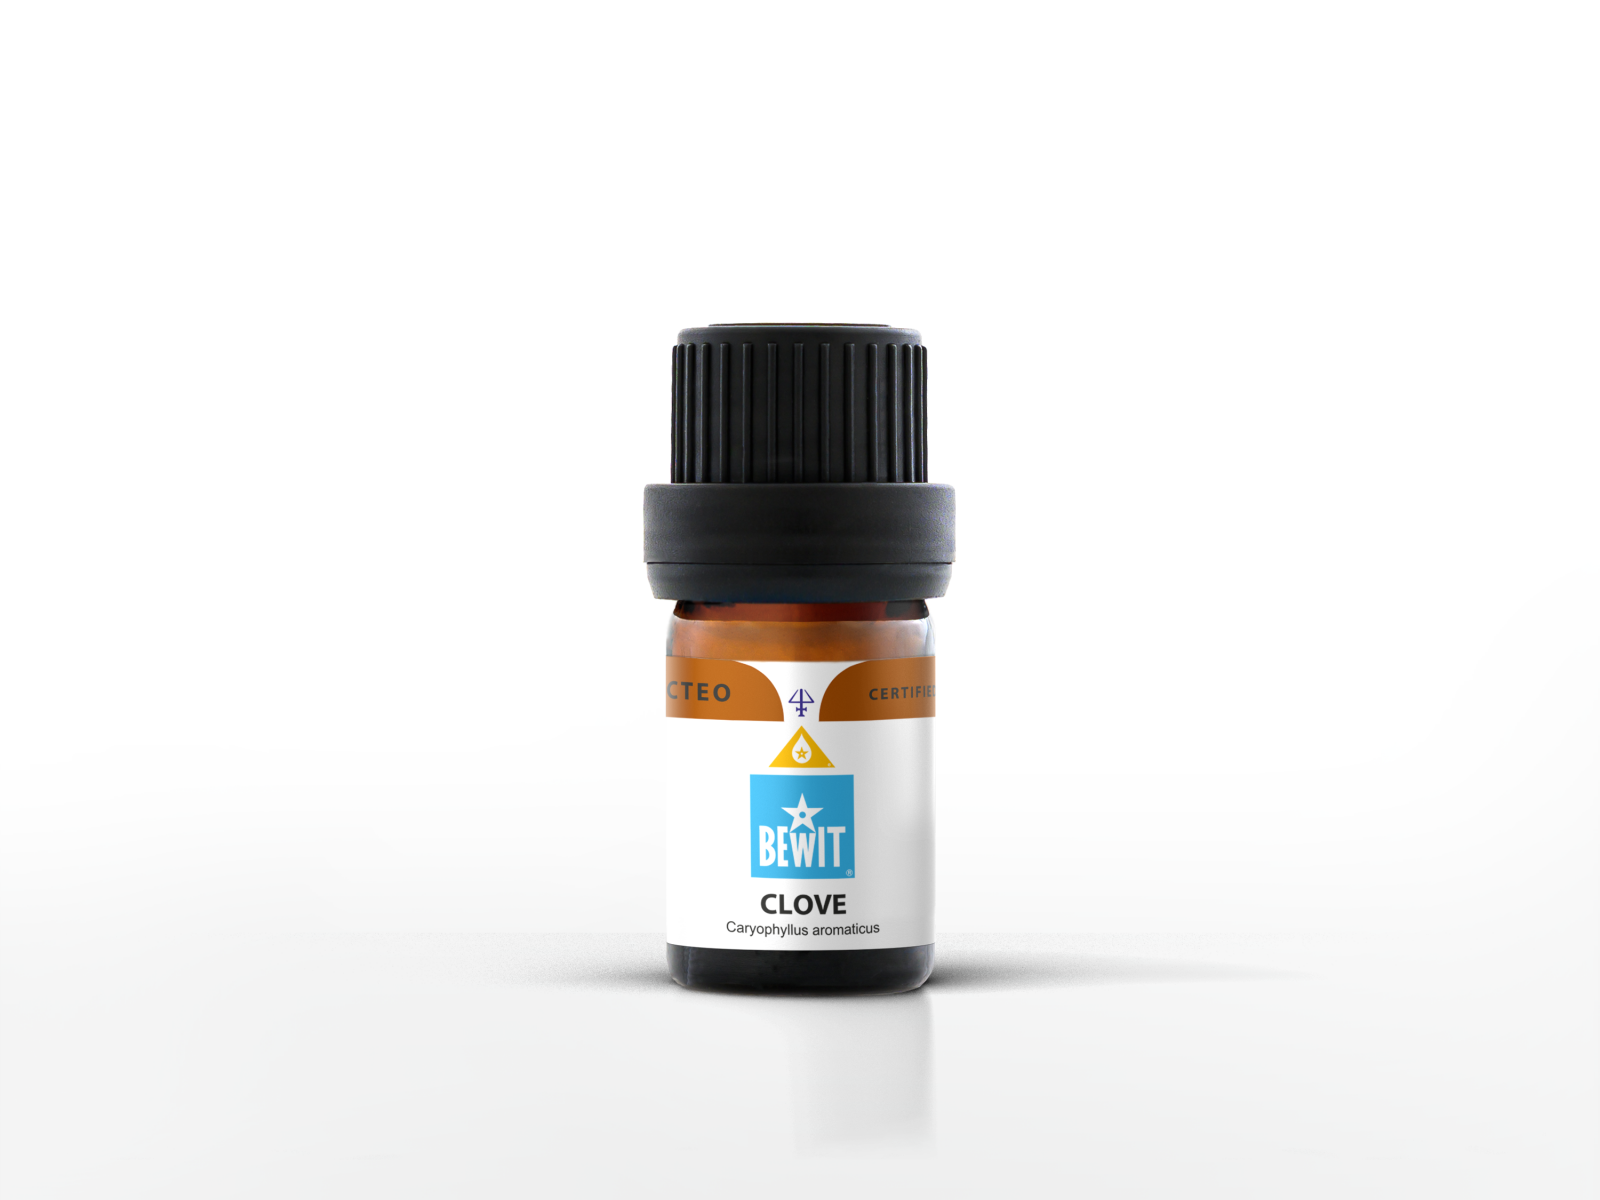 Clove - It is a 100% pure essential oil - 4